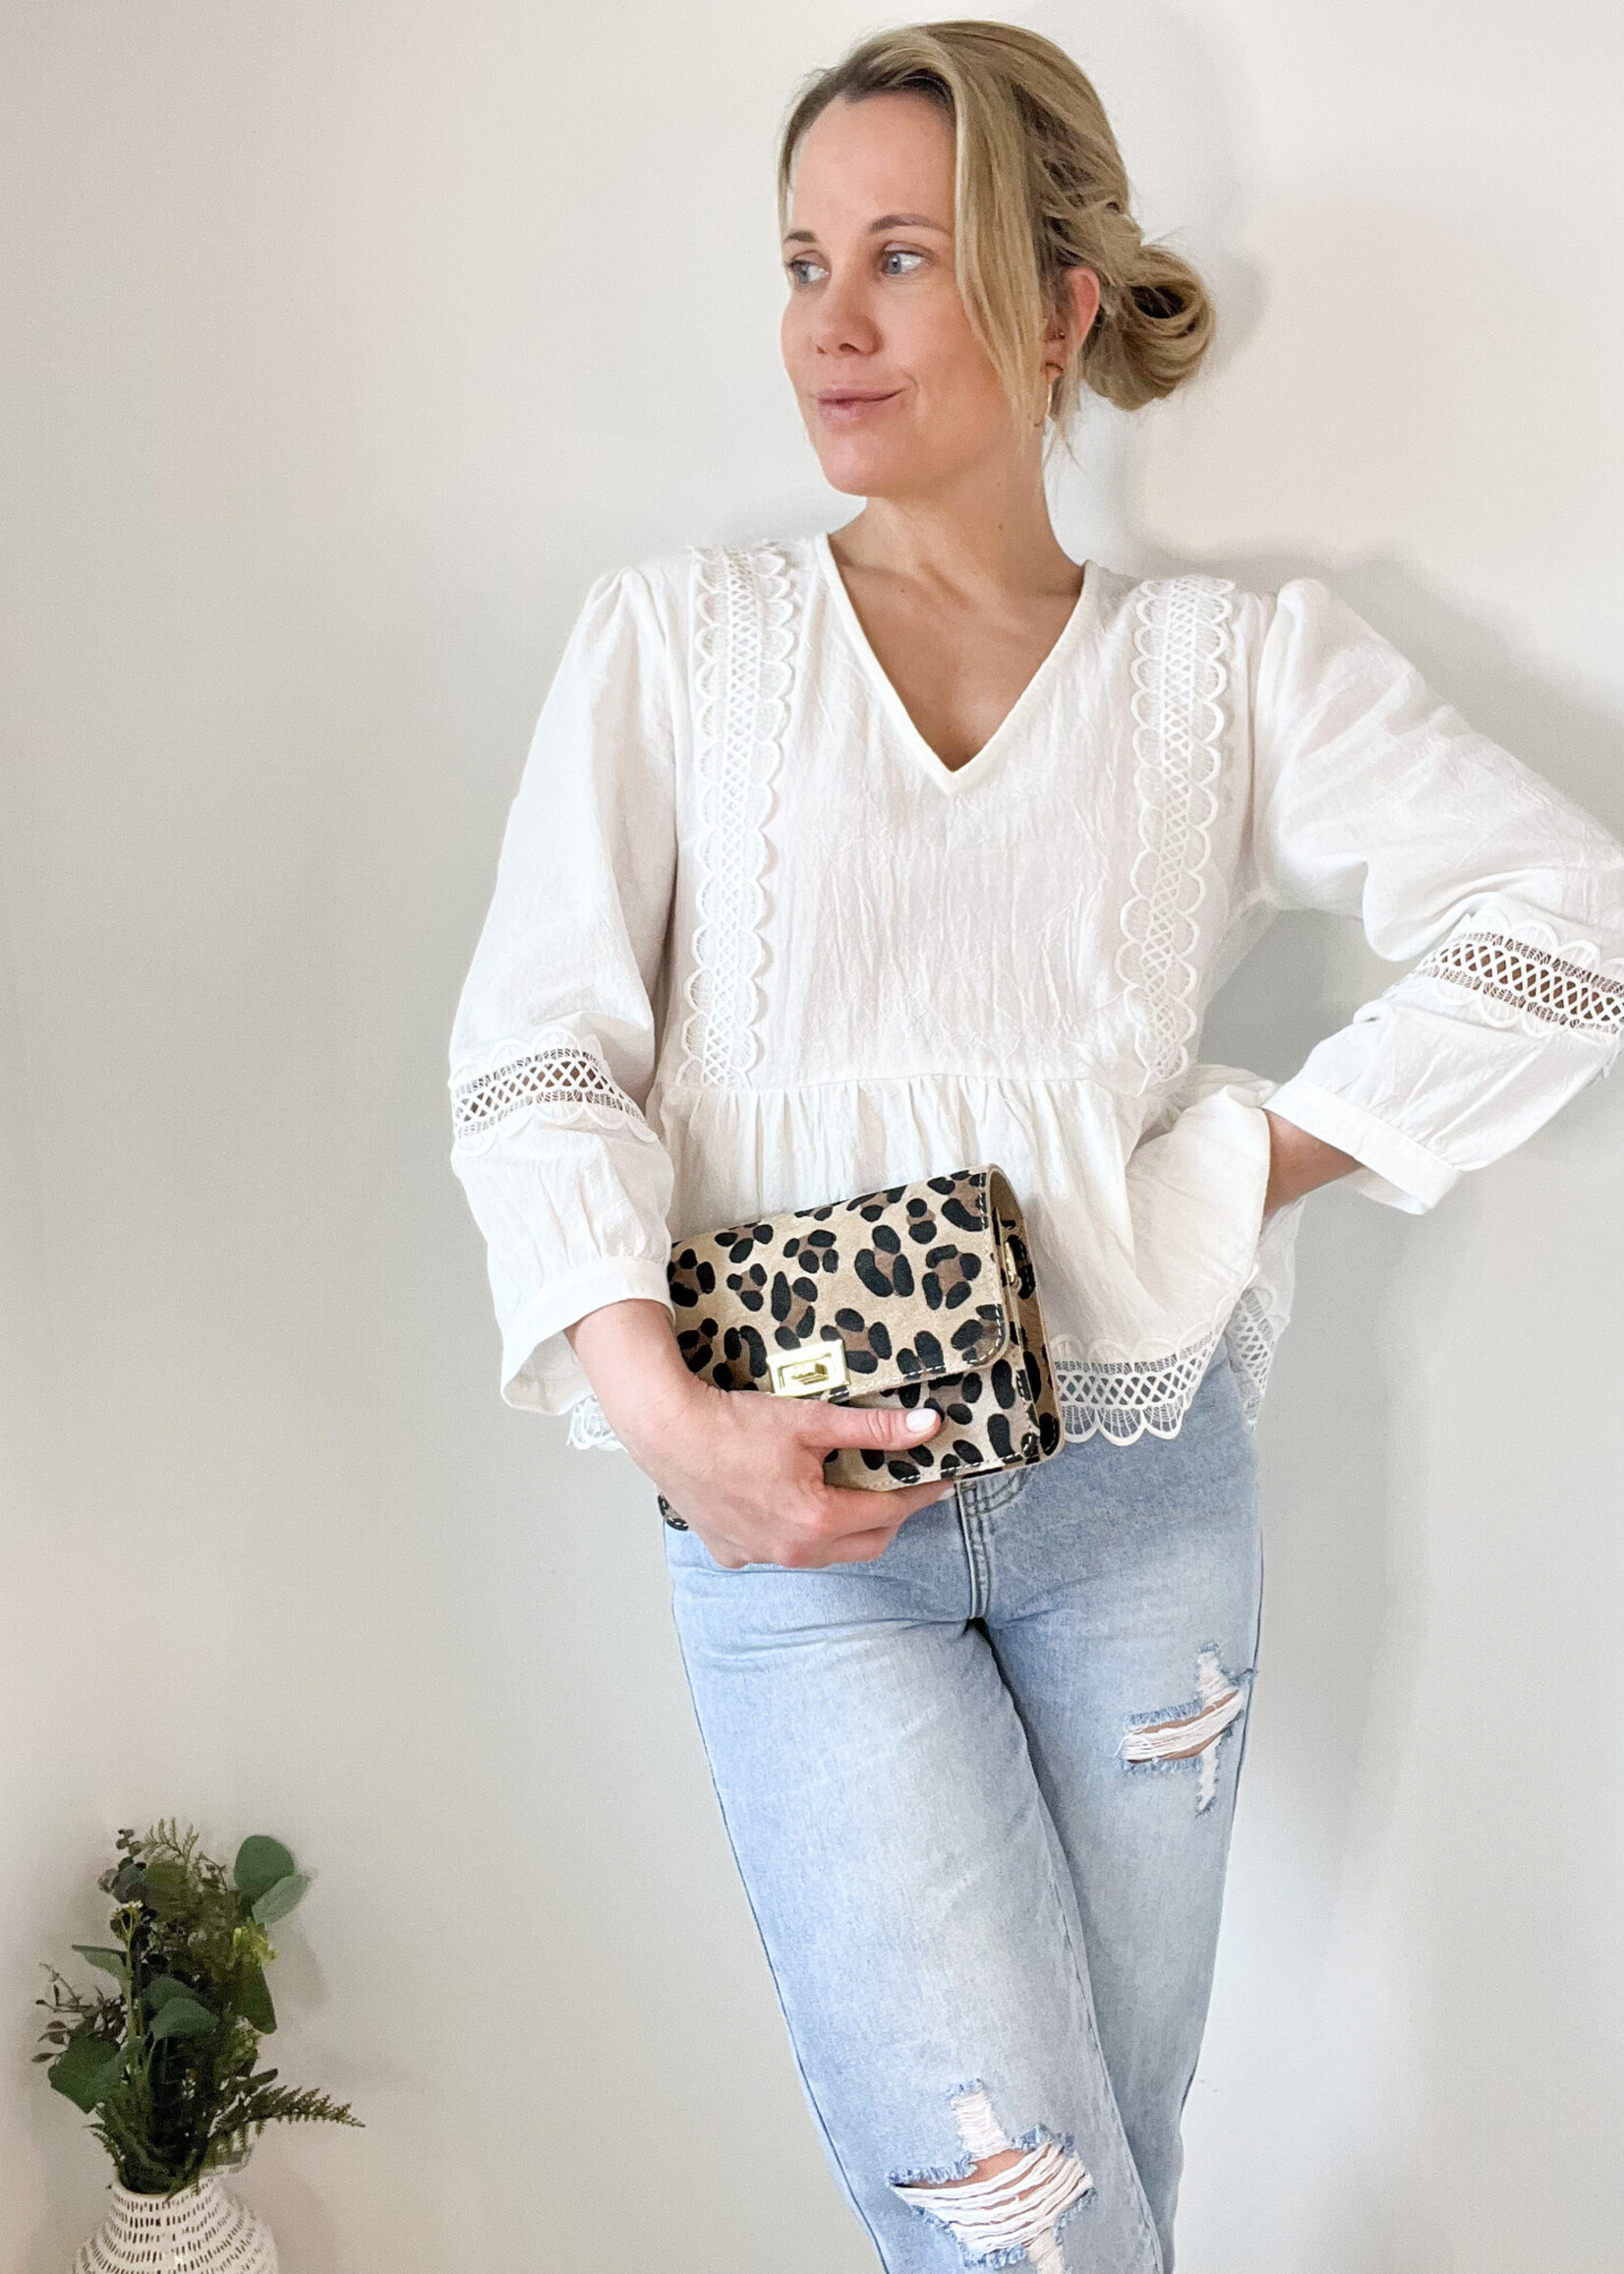 ROMANTIC TOUCH OF LACE BLOUSE